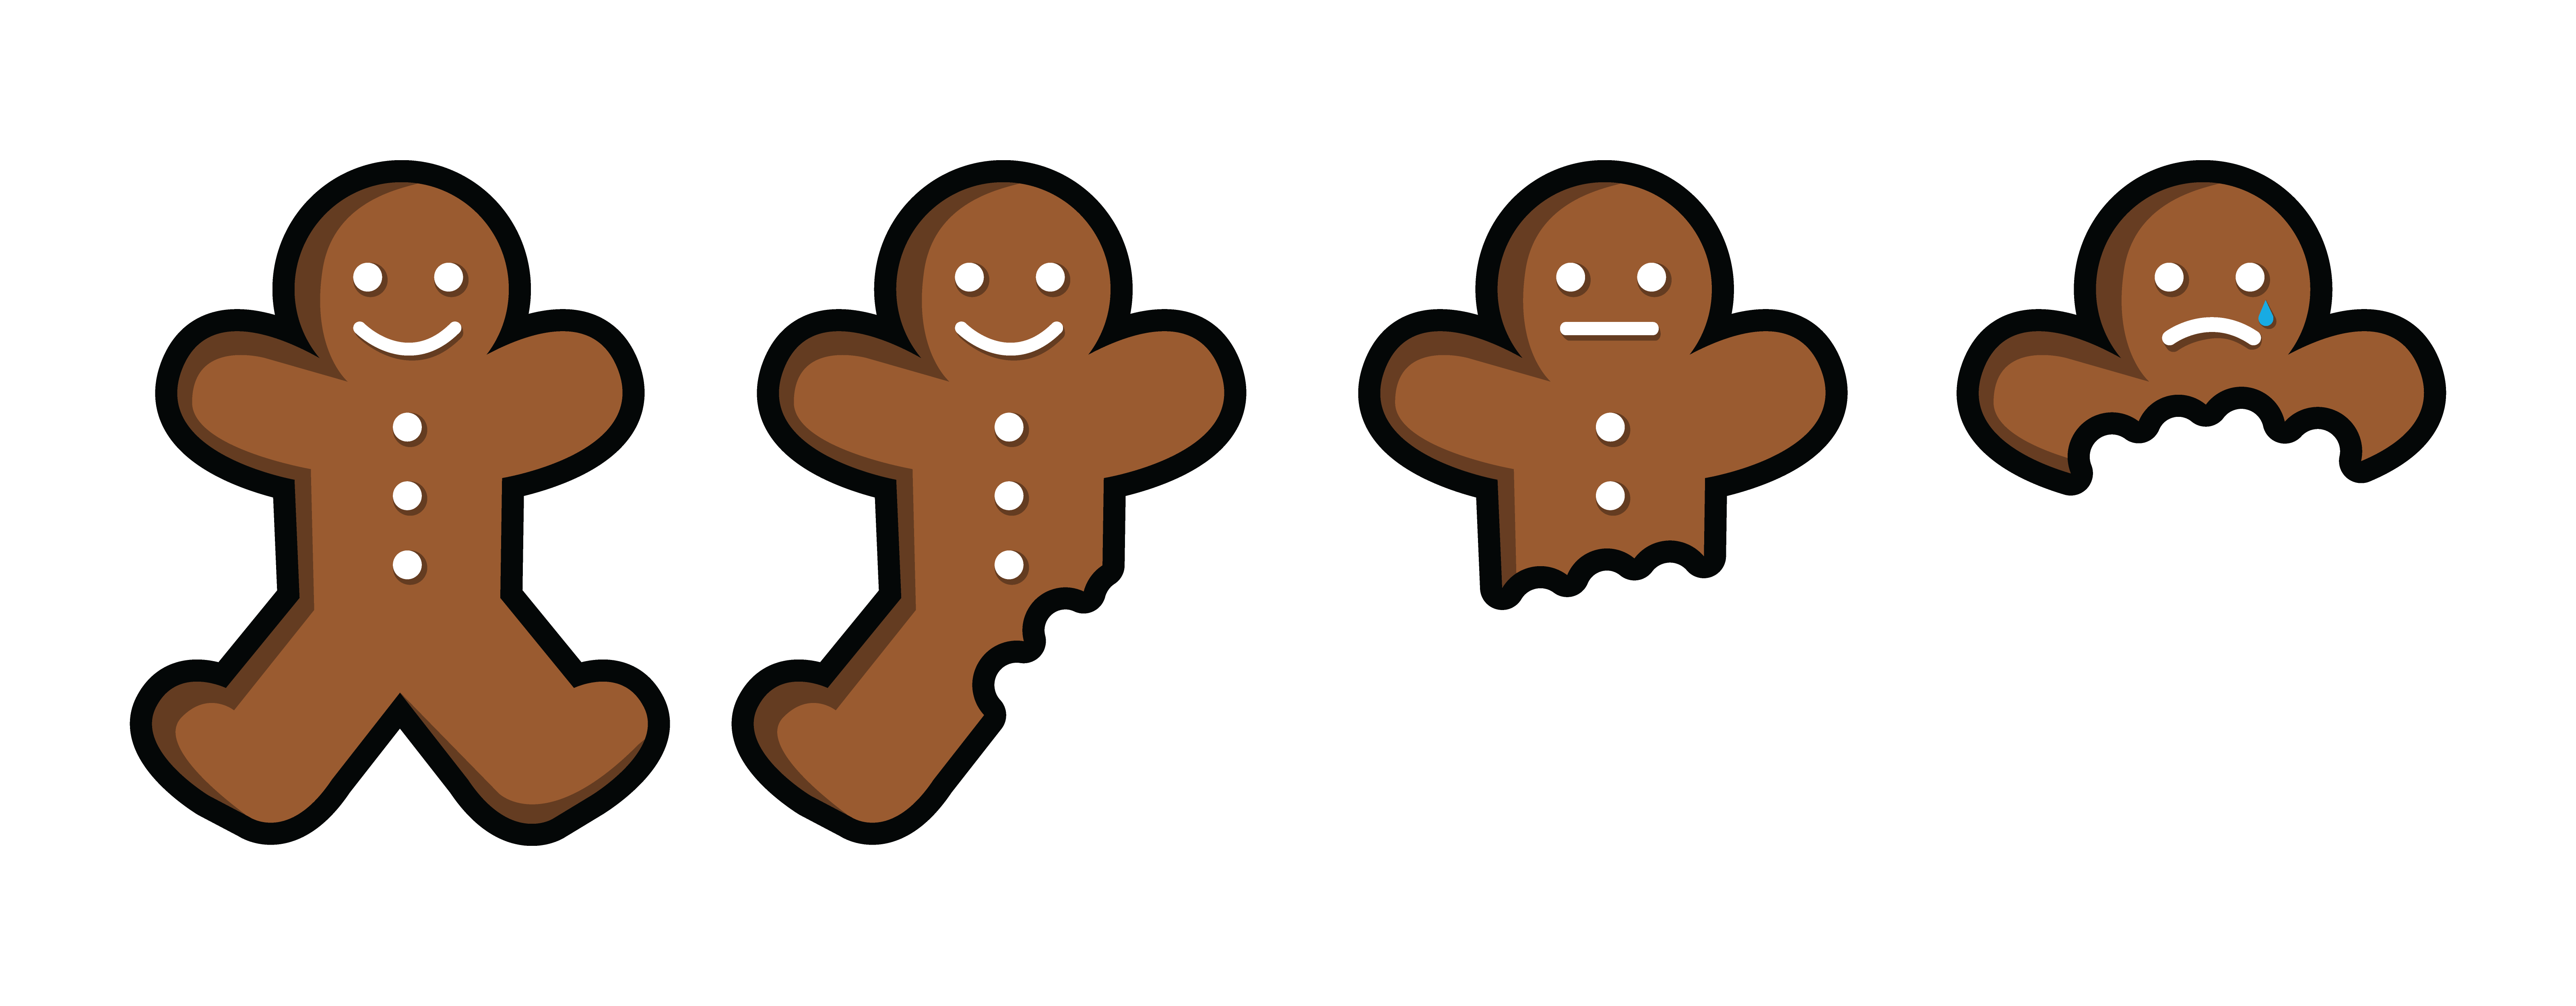 Gingerbread clipart eaten - Pencil and in color gingerbread clipart ...